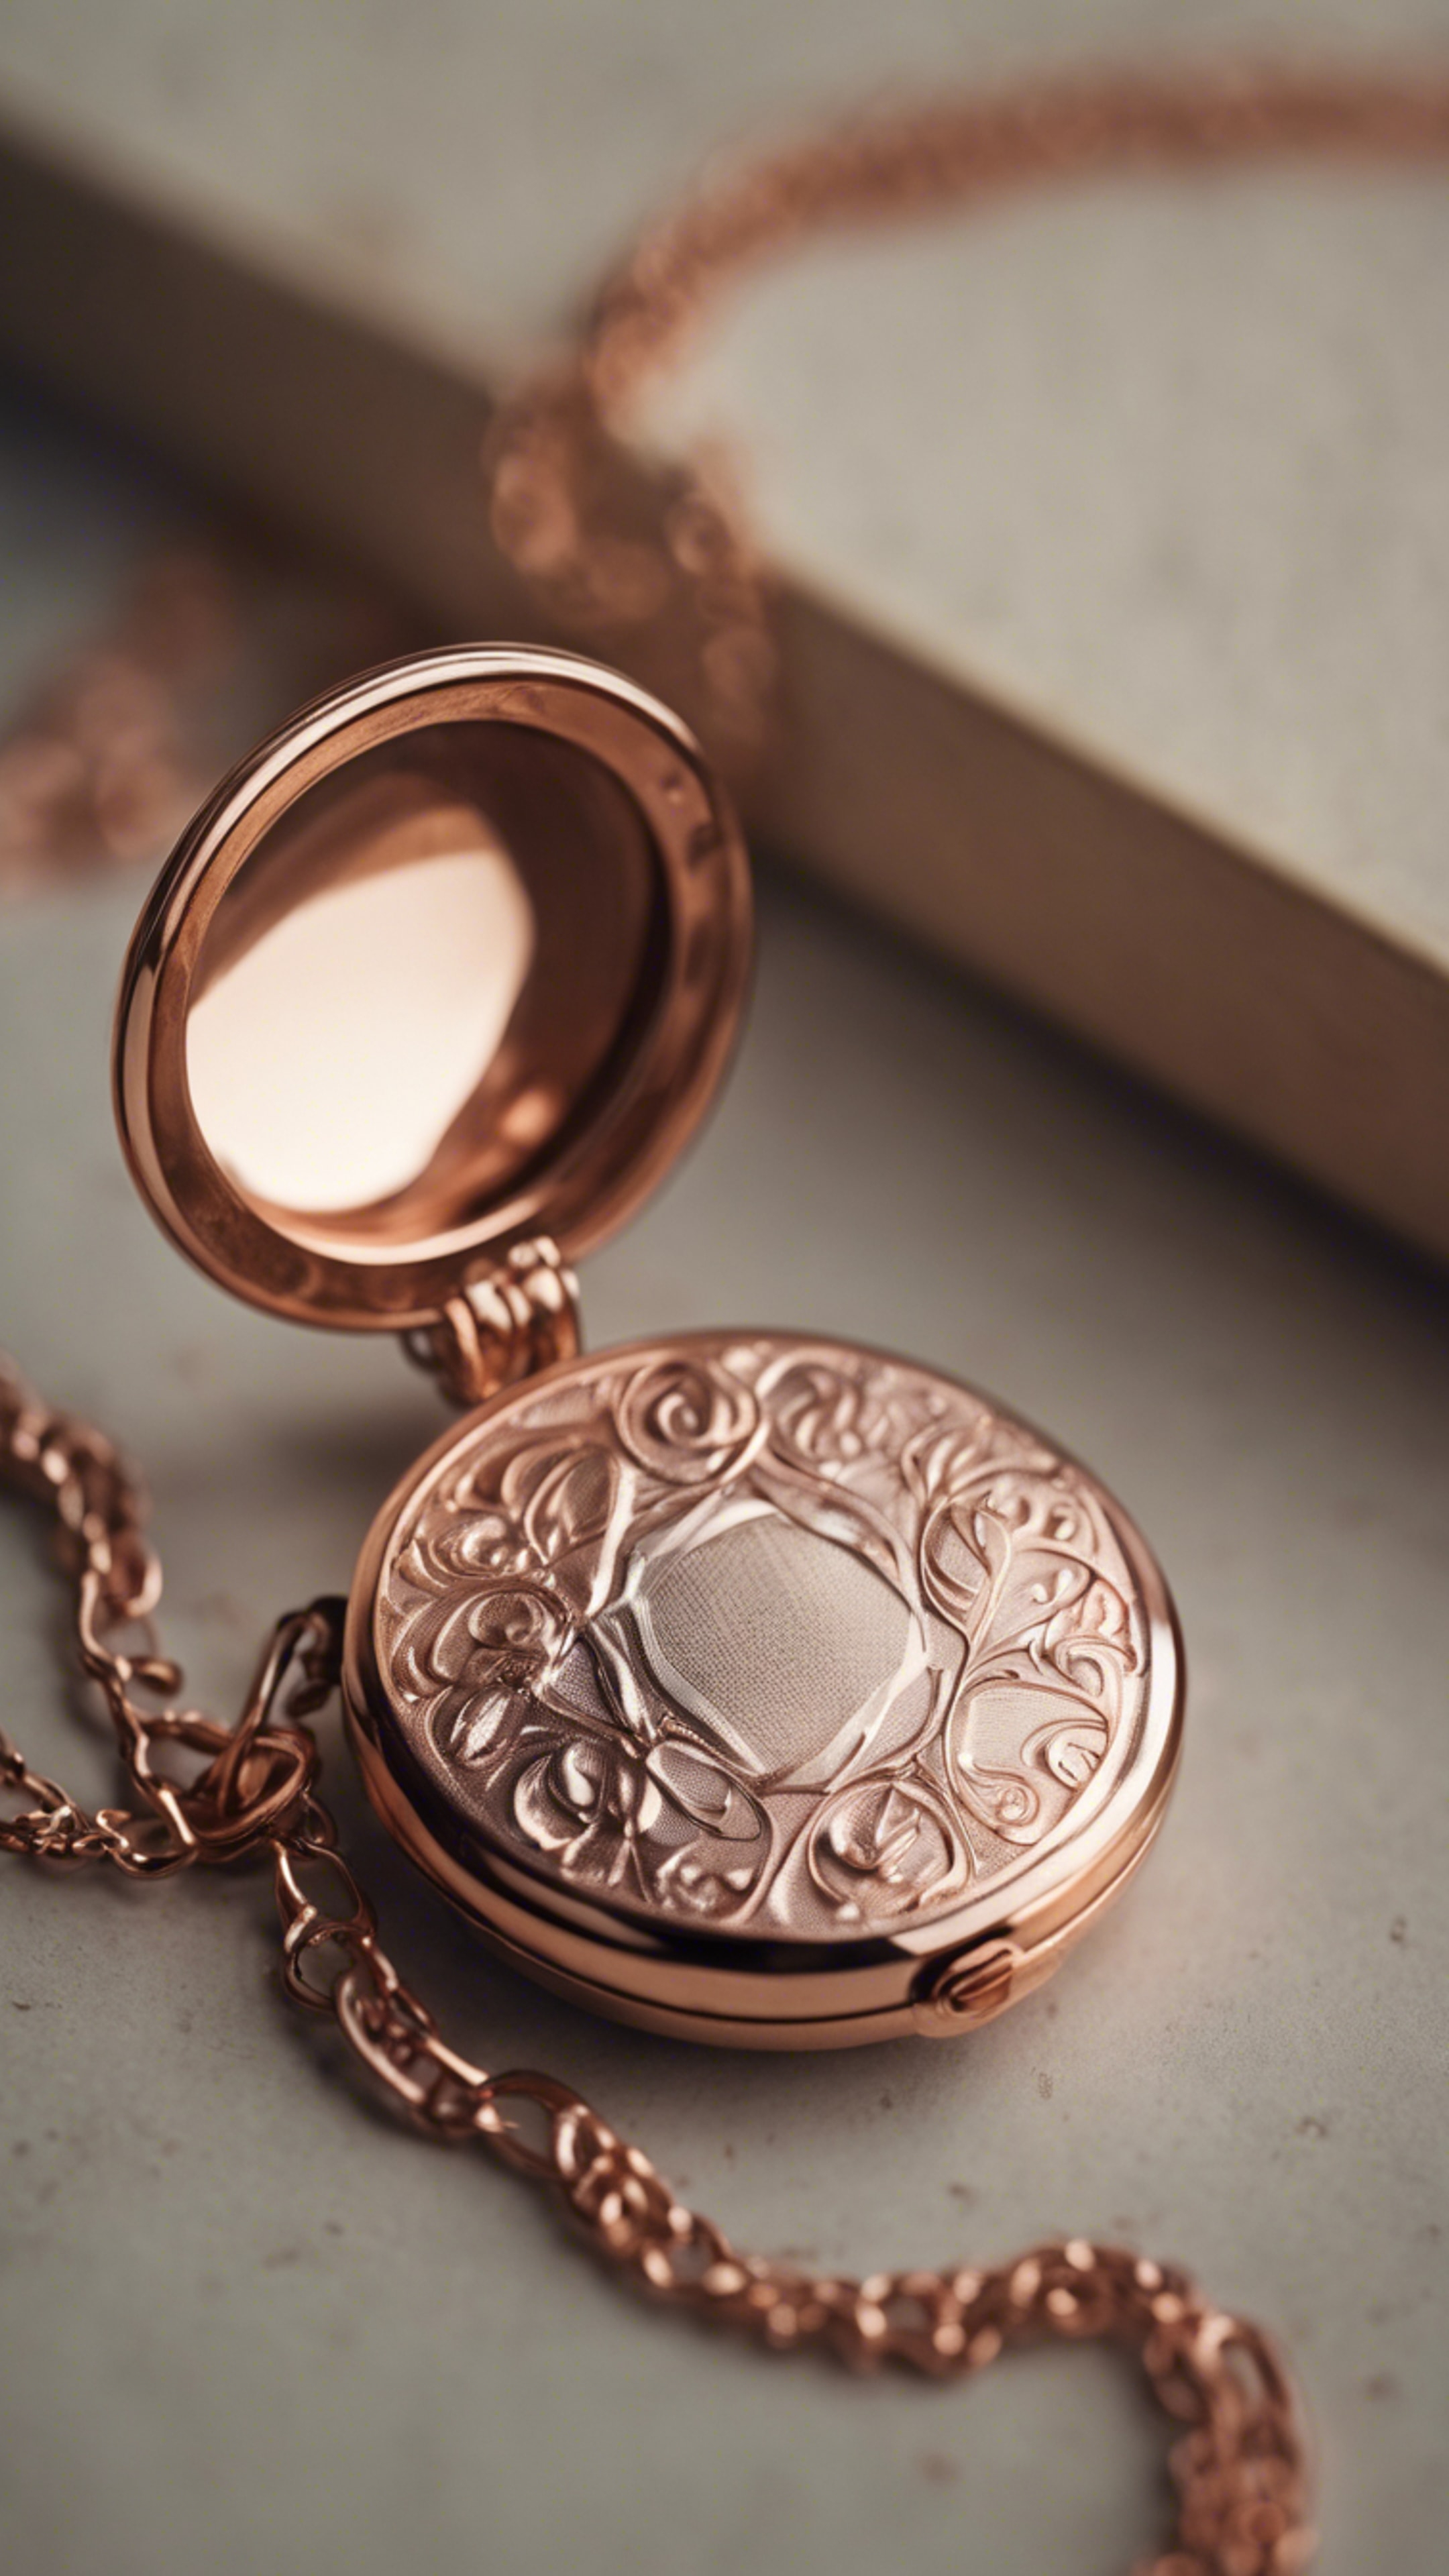 A close-up of a vintage rose gold locket, partially open to reveal a mysterious photo.壁紙[0dd12d424f3445b4a784]